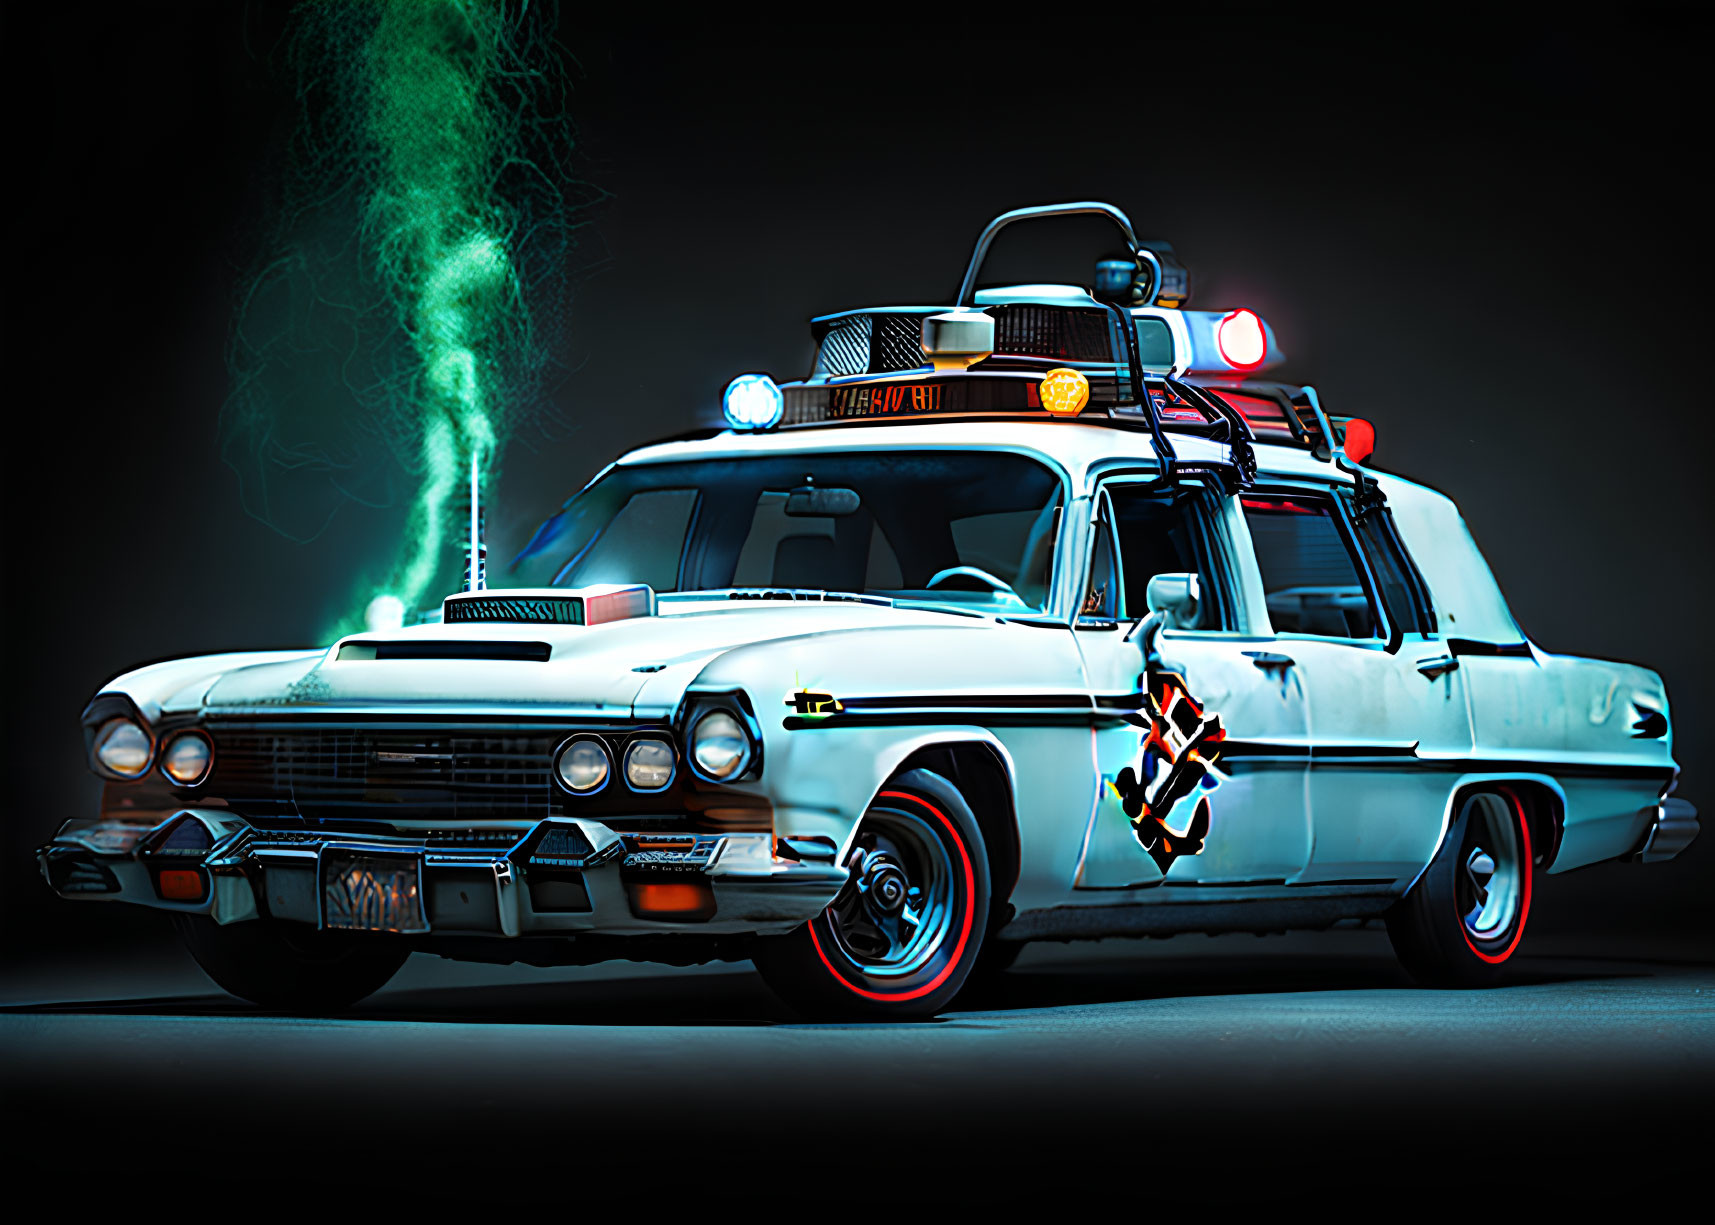 Vintage White Car with Colorful Lighting and Green Smoke on Dark Background